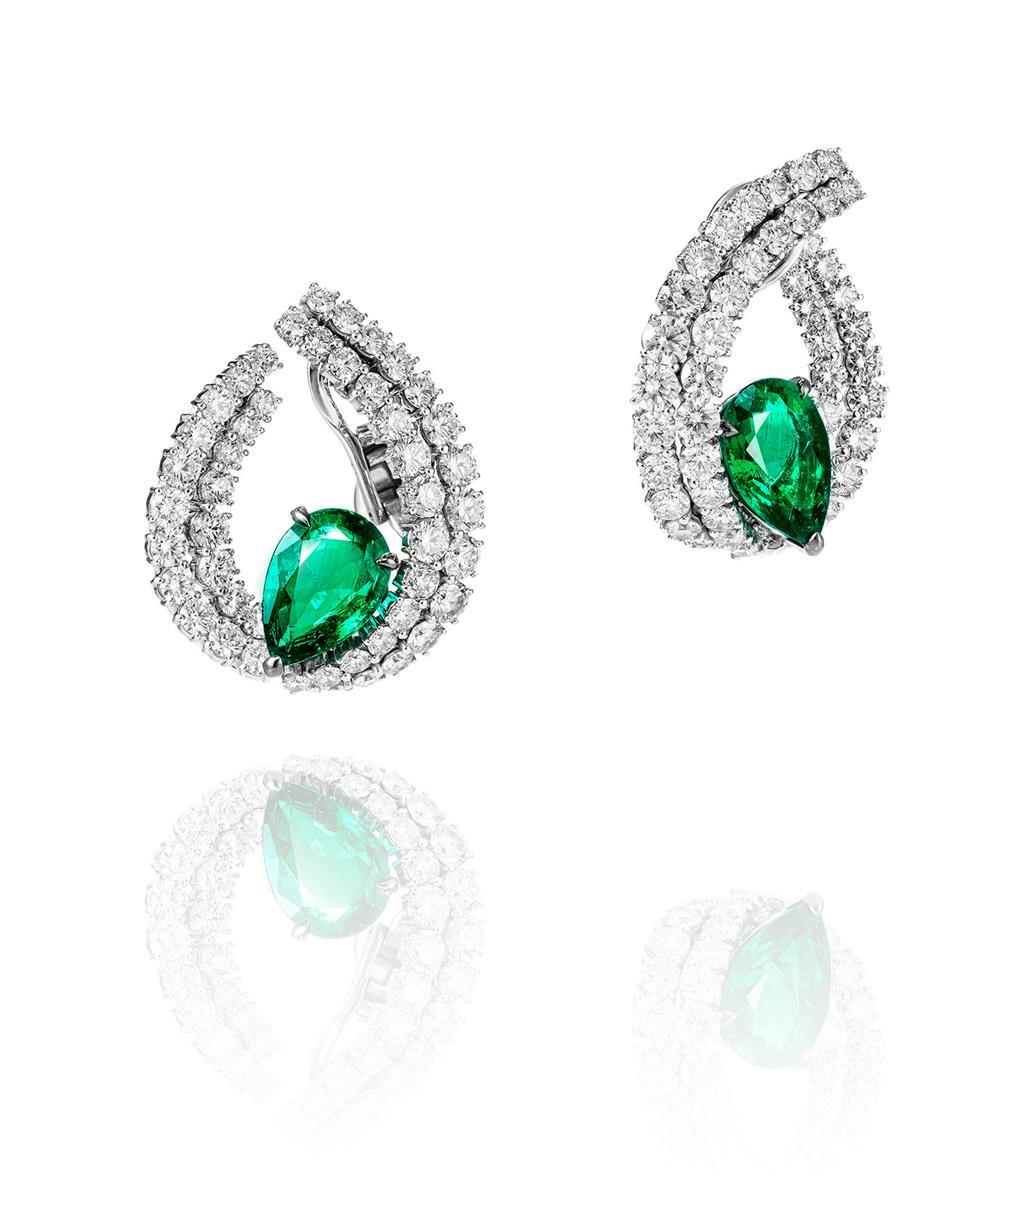 Earrings "Le Printemps" - White gold set with 2 pear-shaped emeralds and 98 diamonds